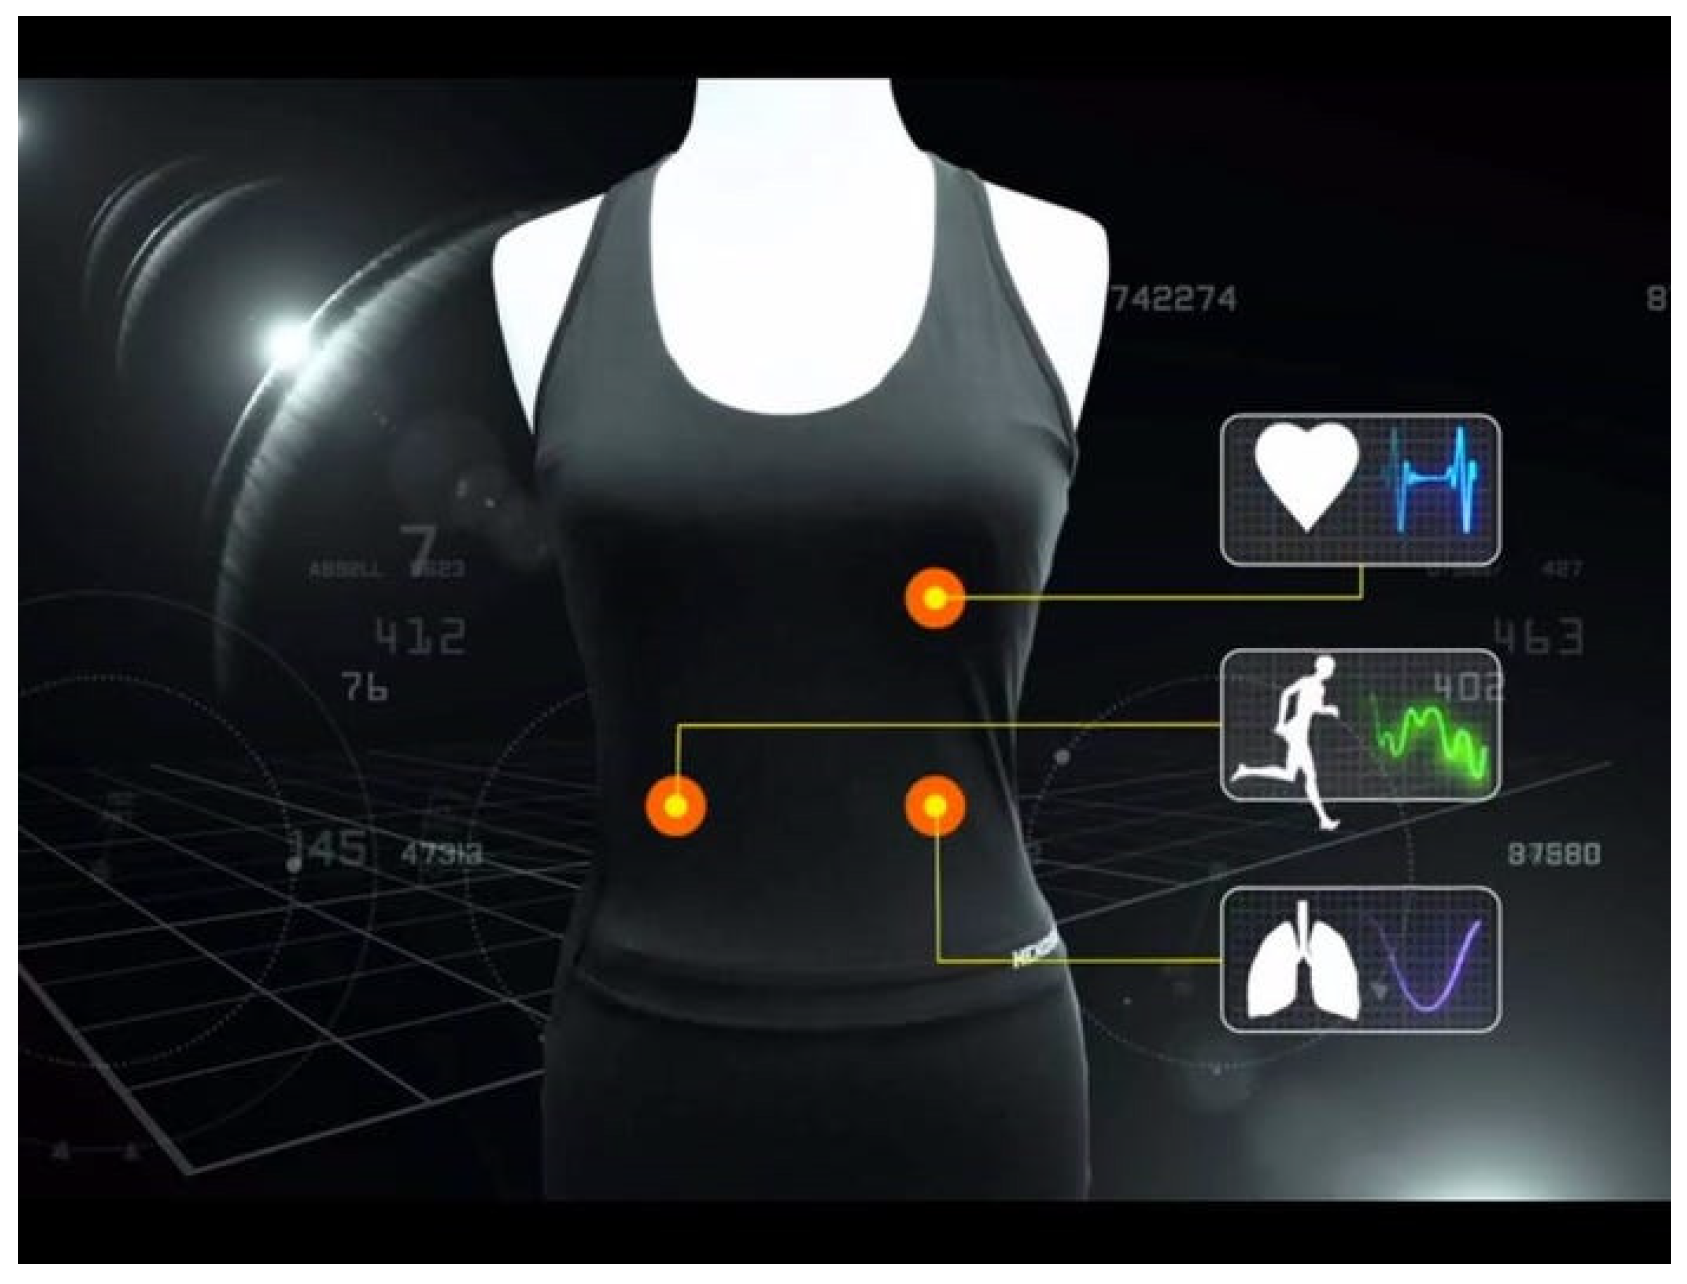 wearable technology clothes